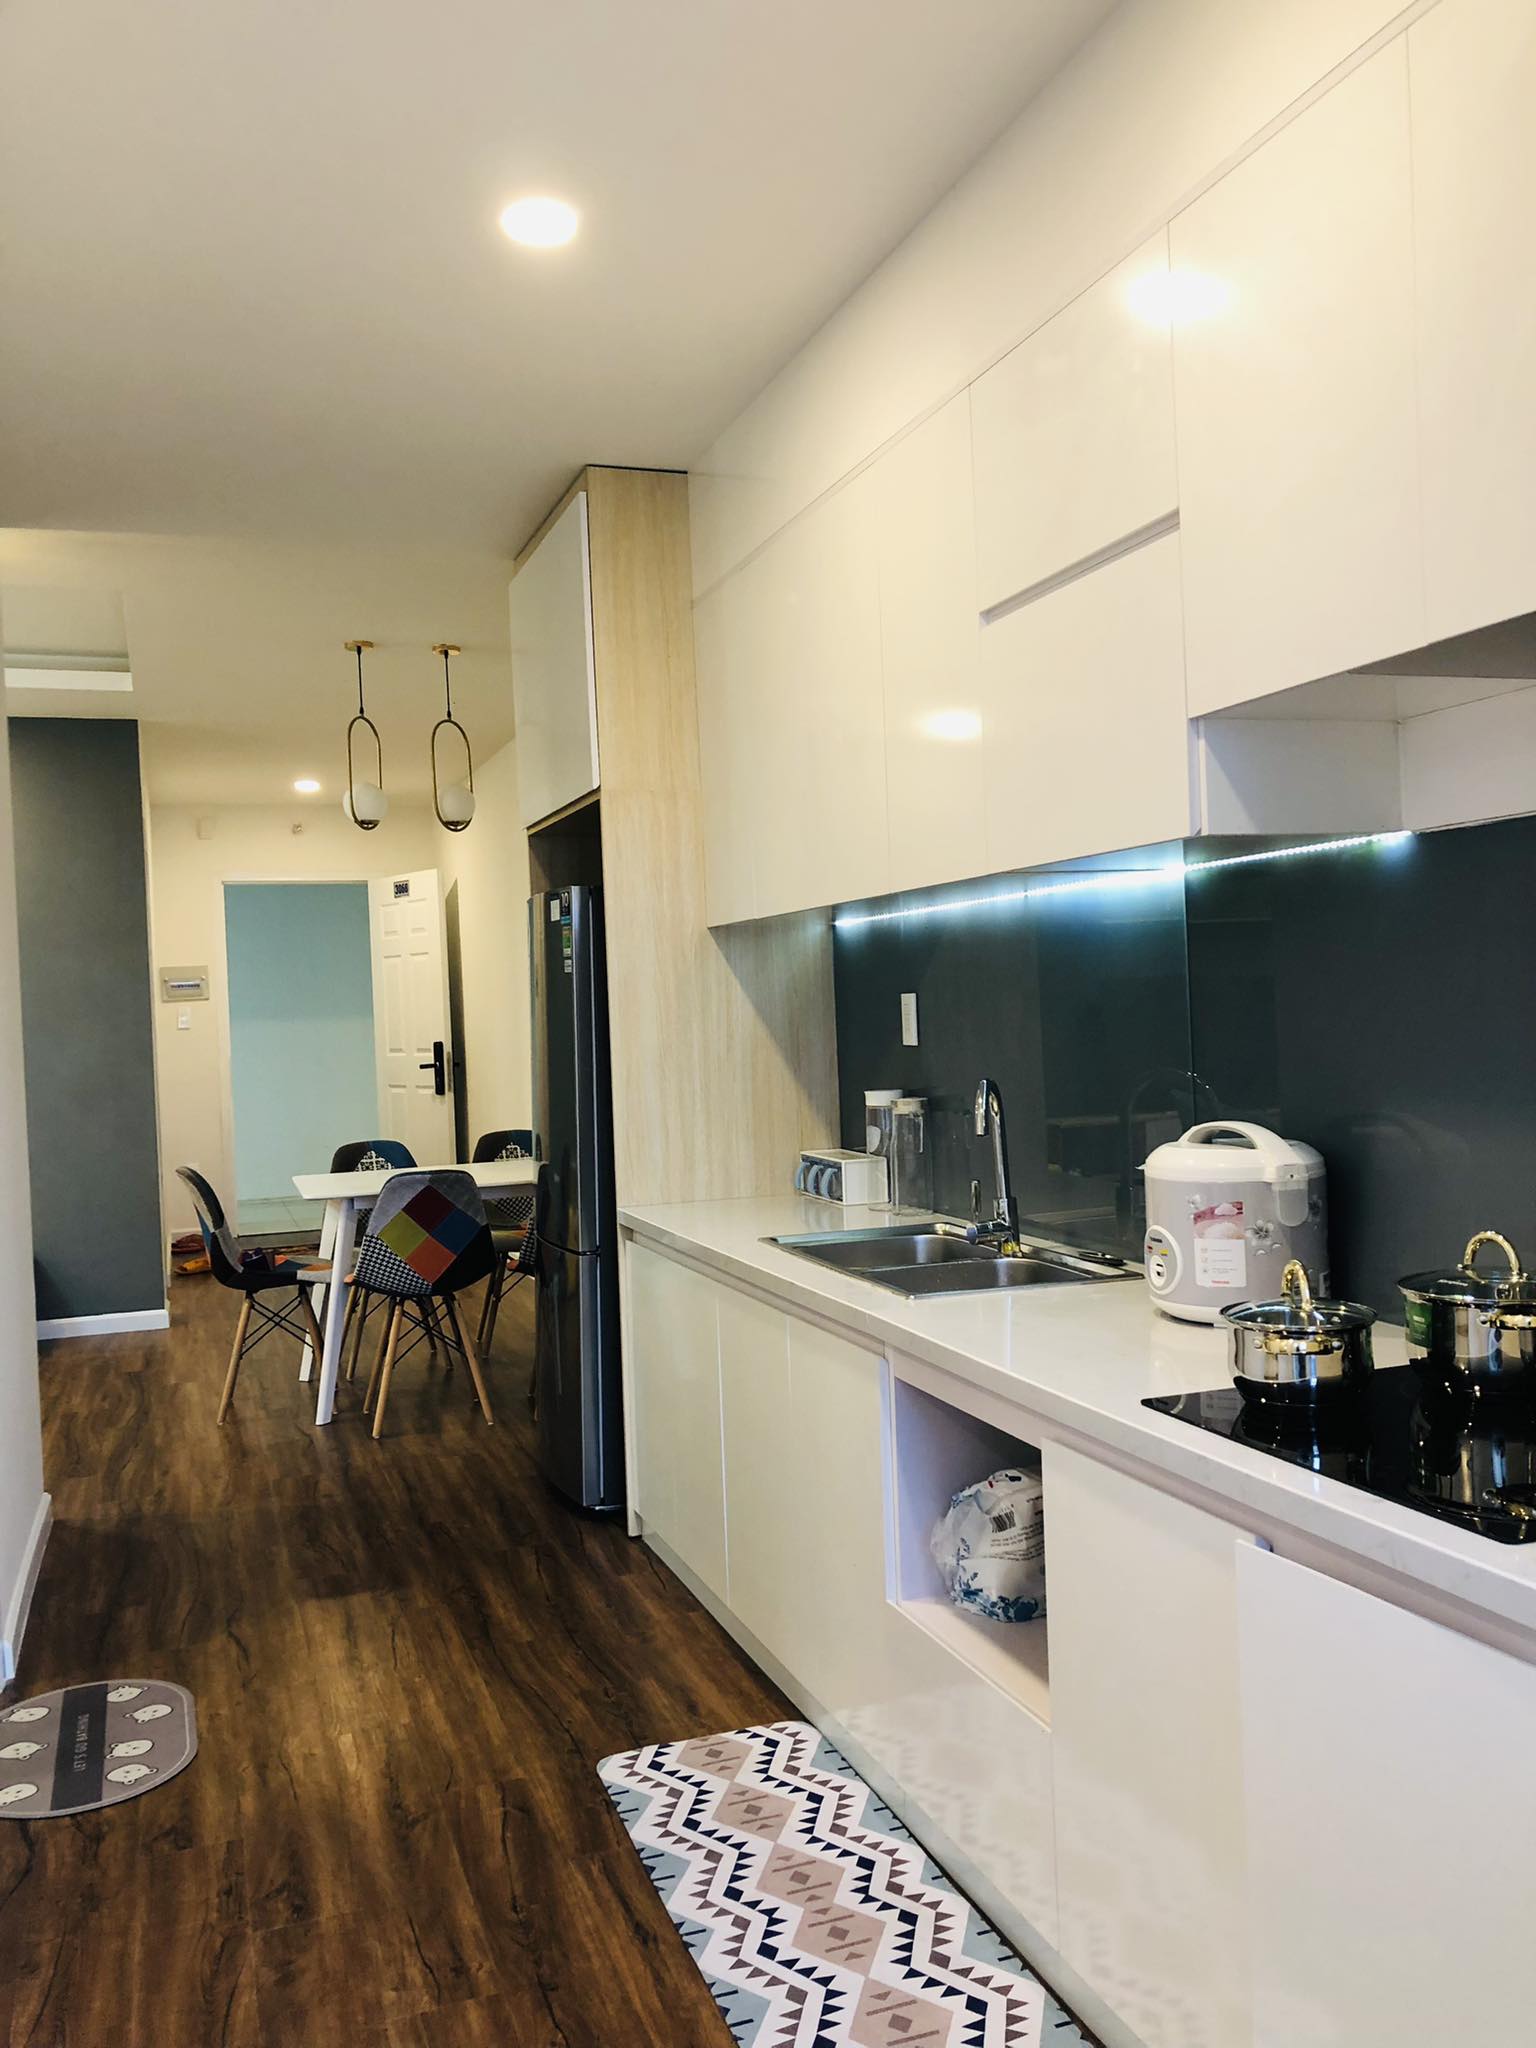 Two bedrooms apartment in Muong Thanh building near Tran Phu bridge for rent | 12 million